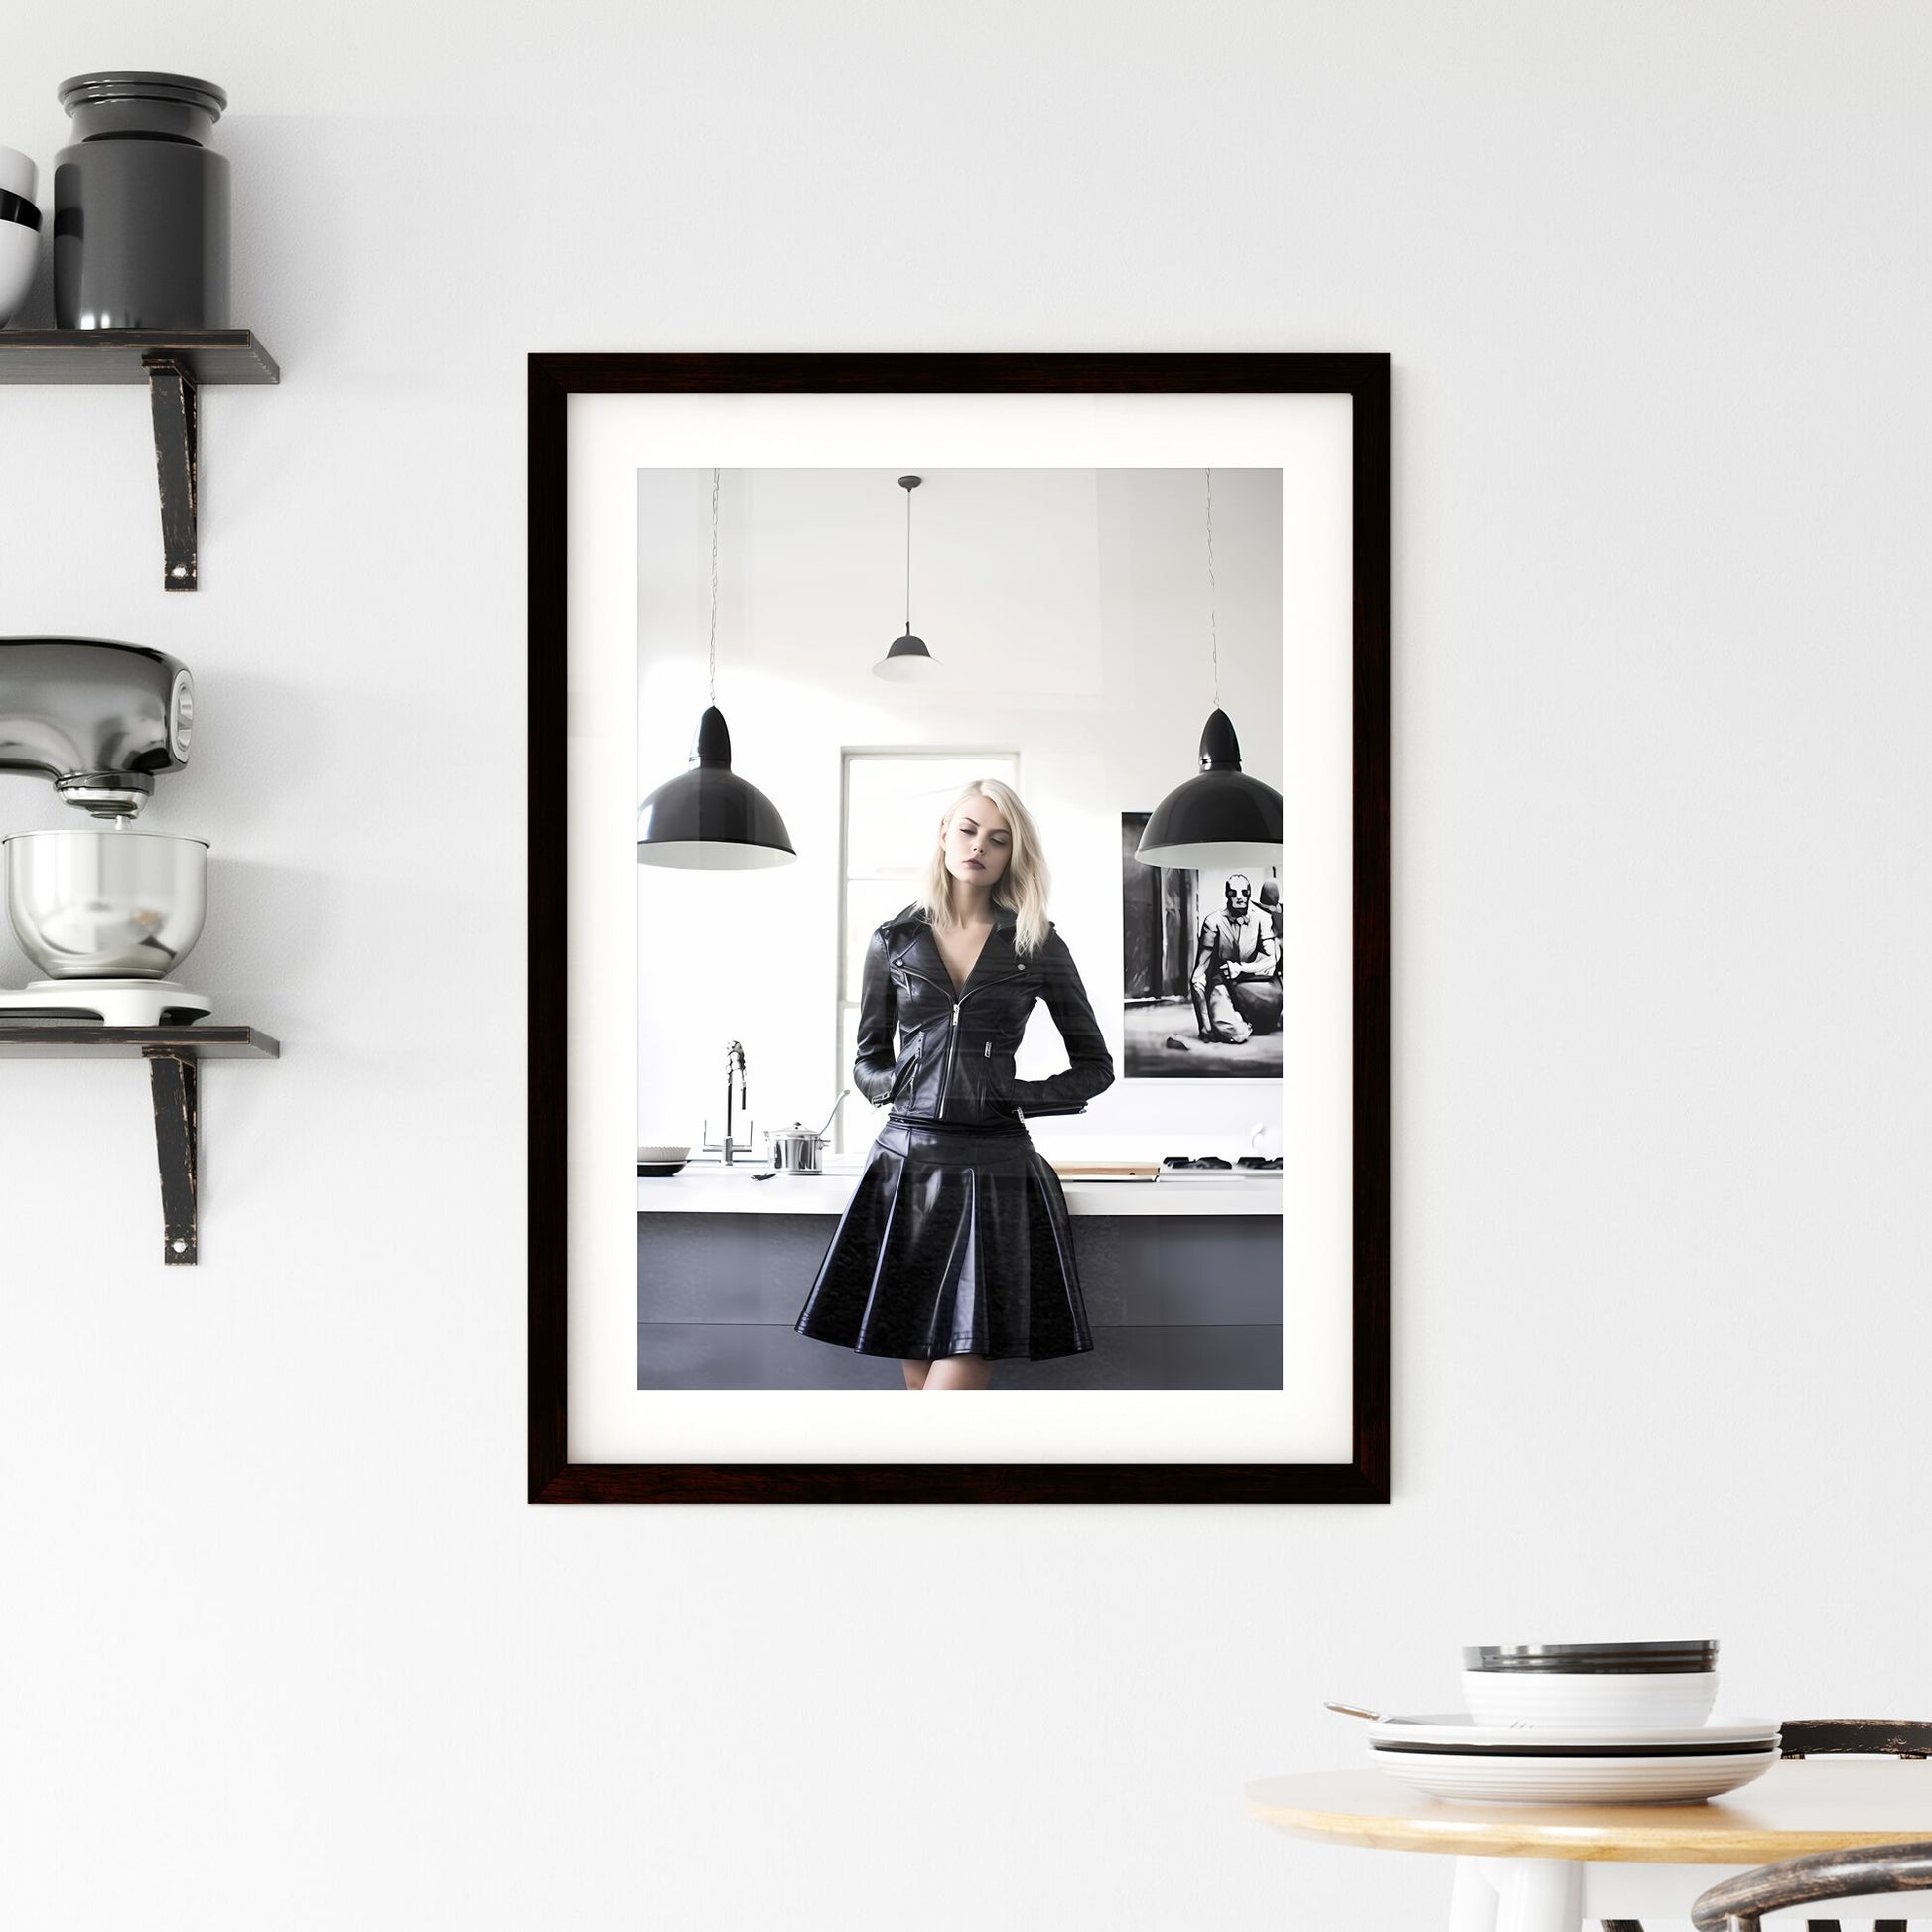 A Poster of leather goddess in a tres chic kitchen - A Woman In A Black Leather Jacket Default Title